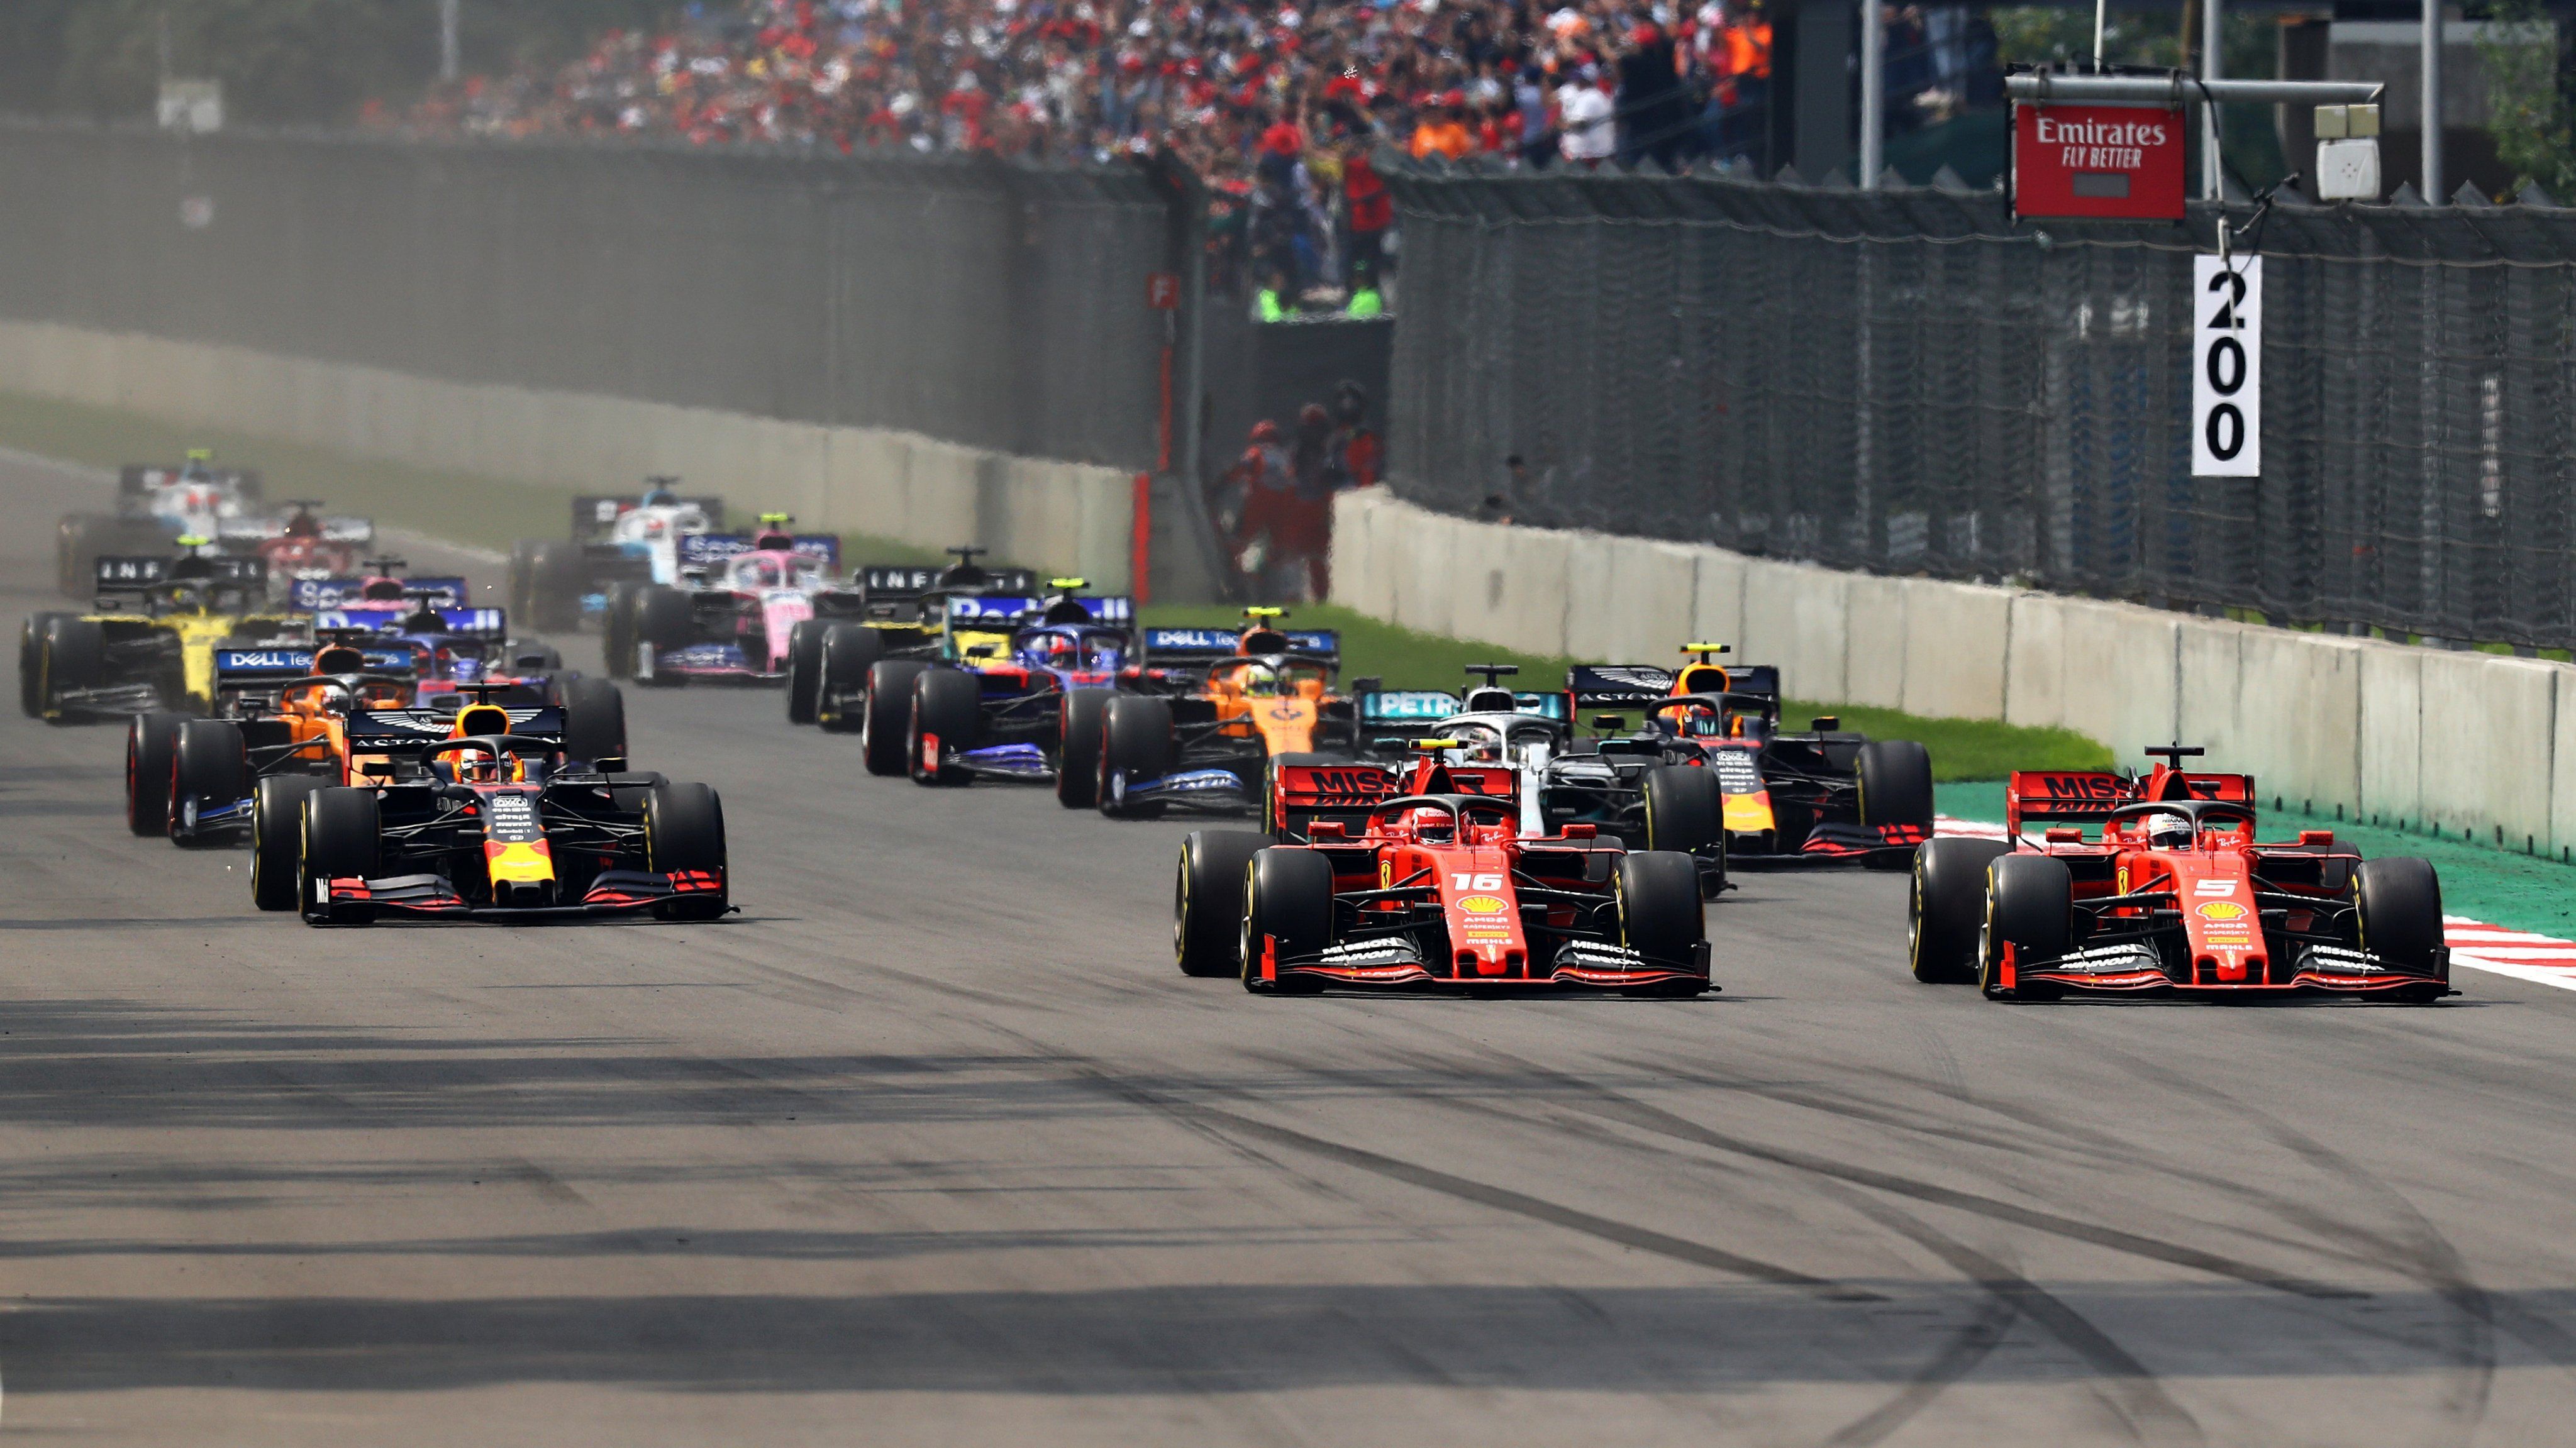 Mexico GP: Key statistics and information from 2019 F1 race